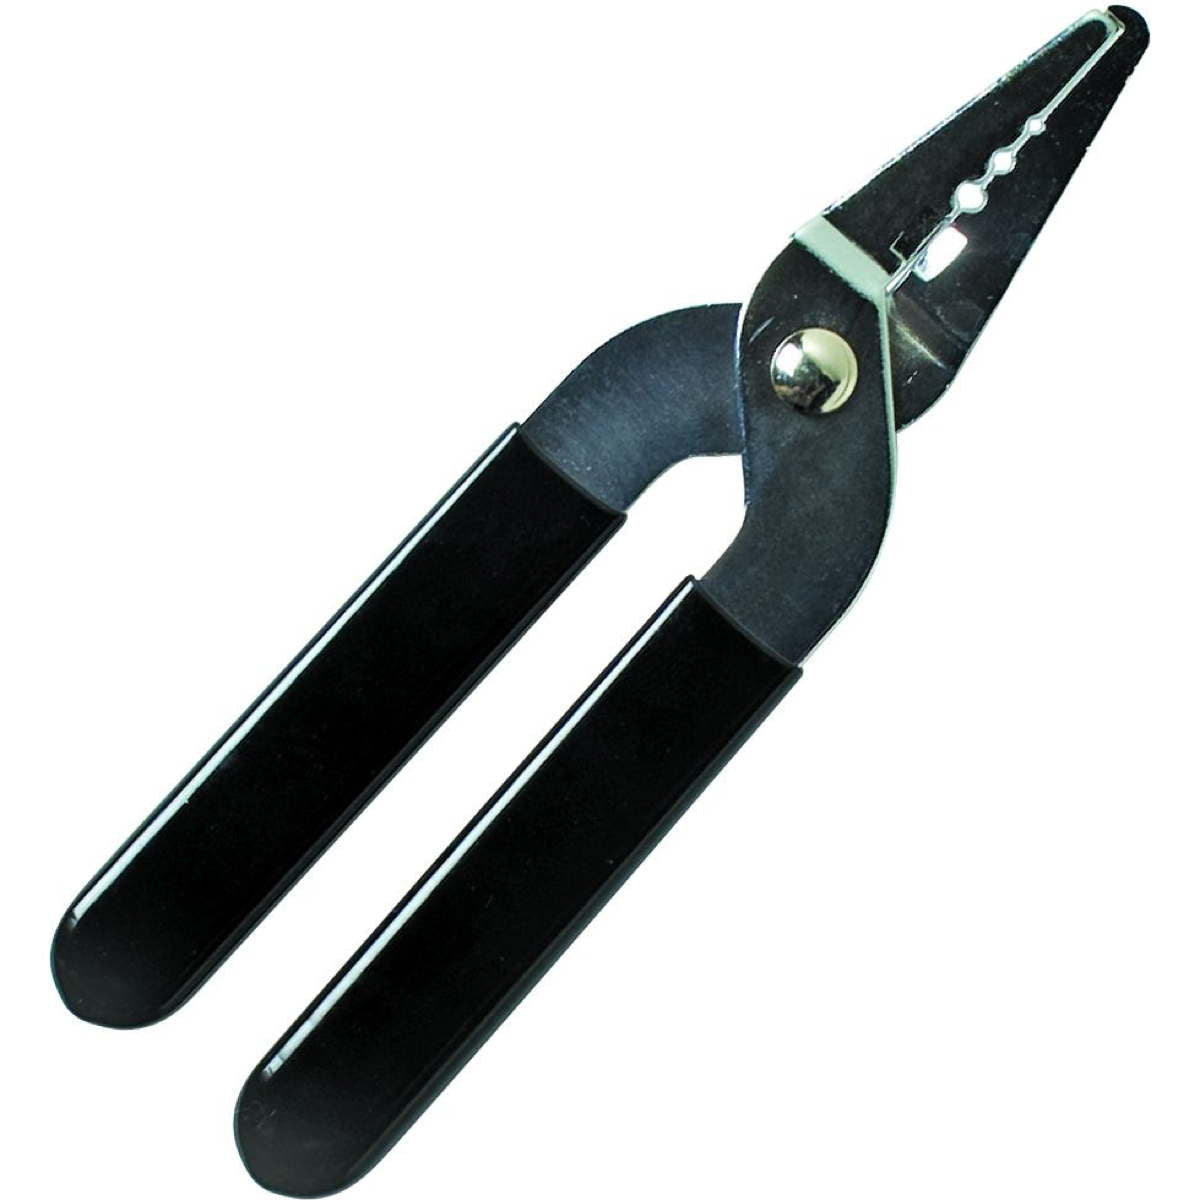 Photo of Eagle Claw Split Ring Pliers for sale at United Tackle Shops.